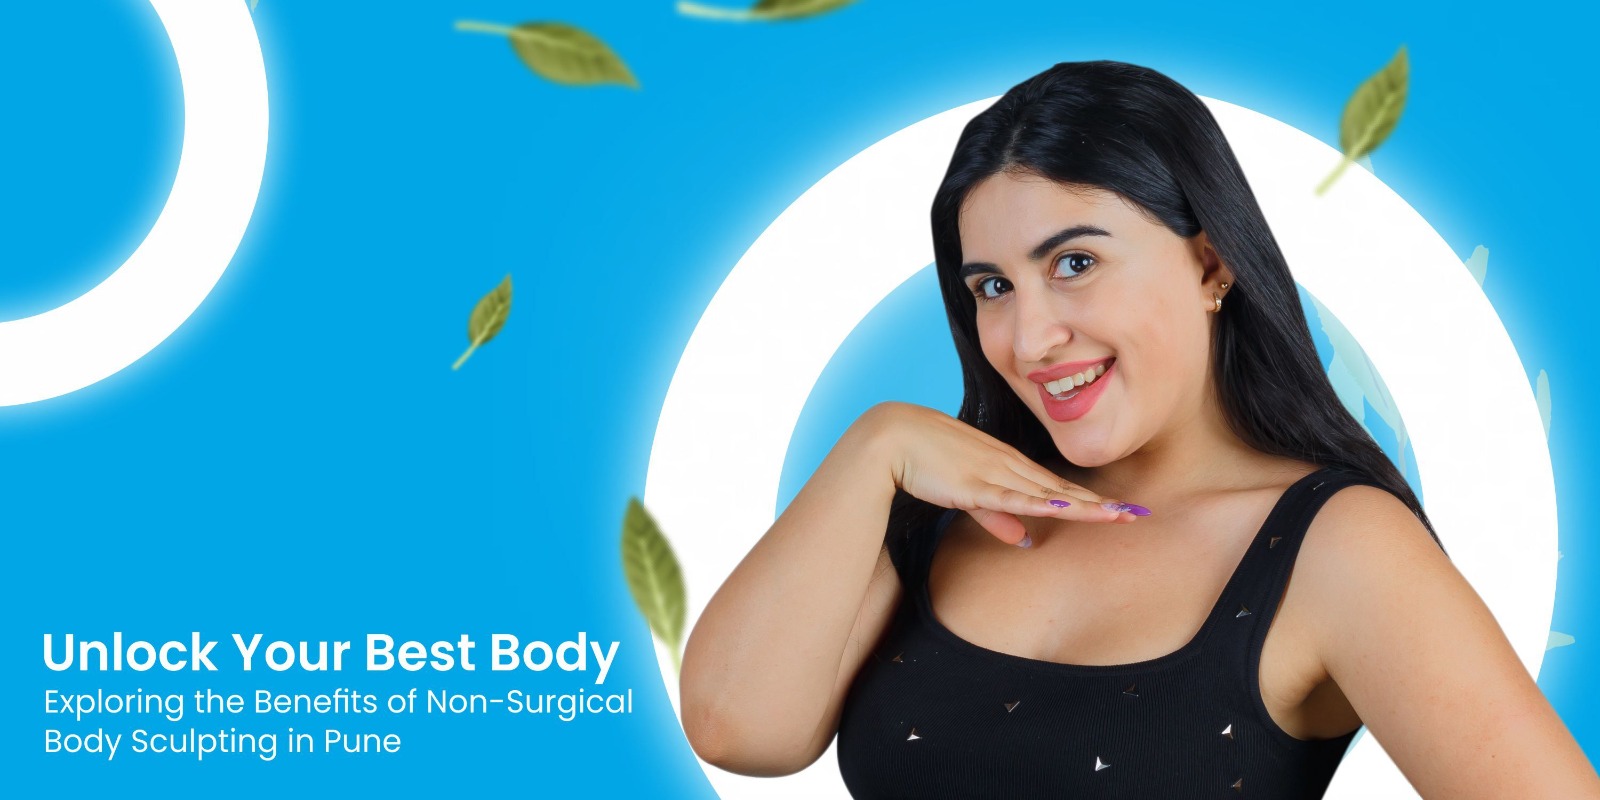  Exploring the Benefits of Non-Surgical Body Sculpting in Pune